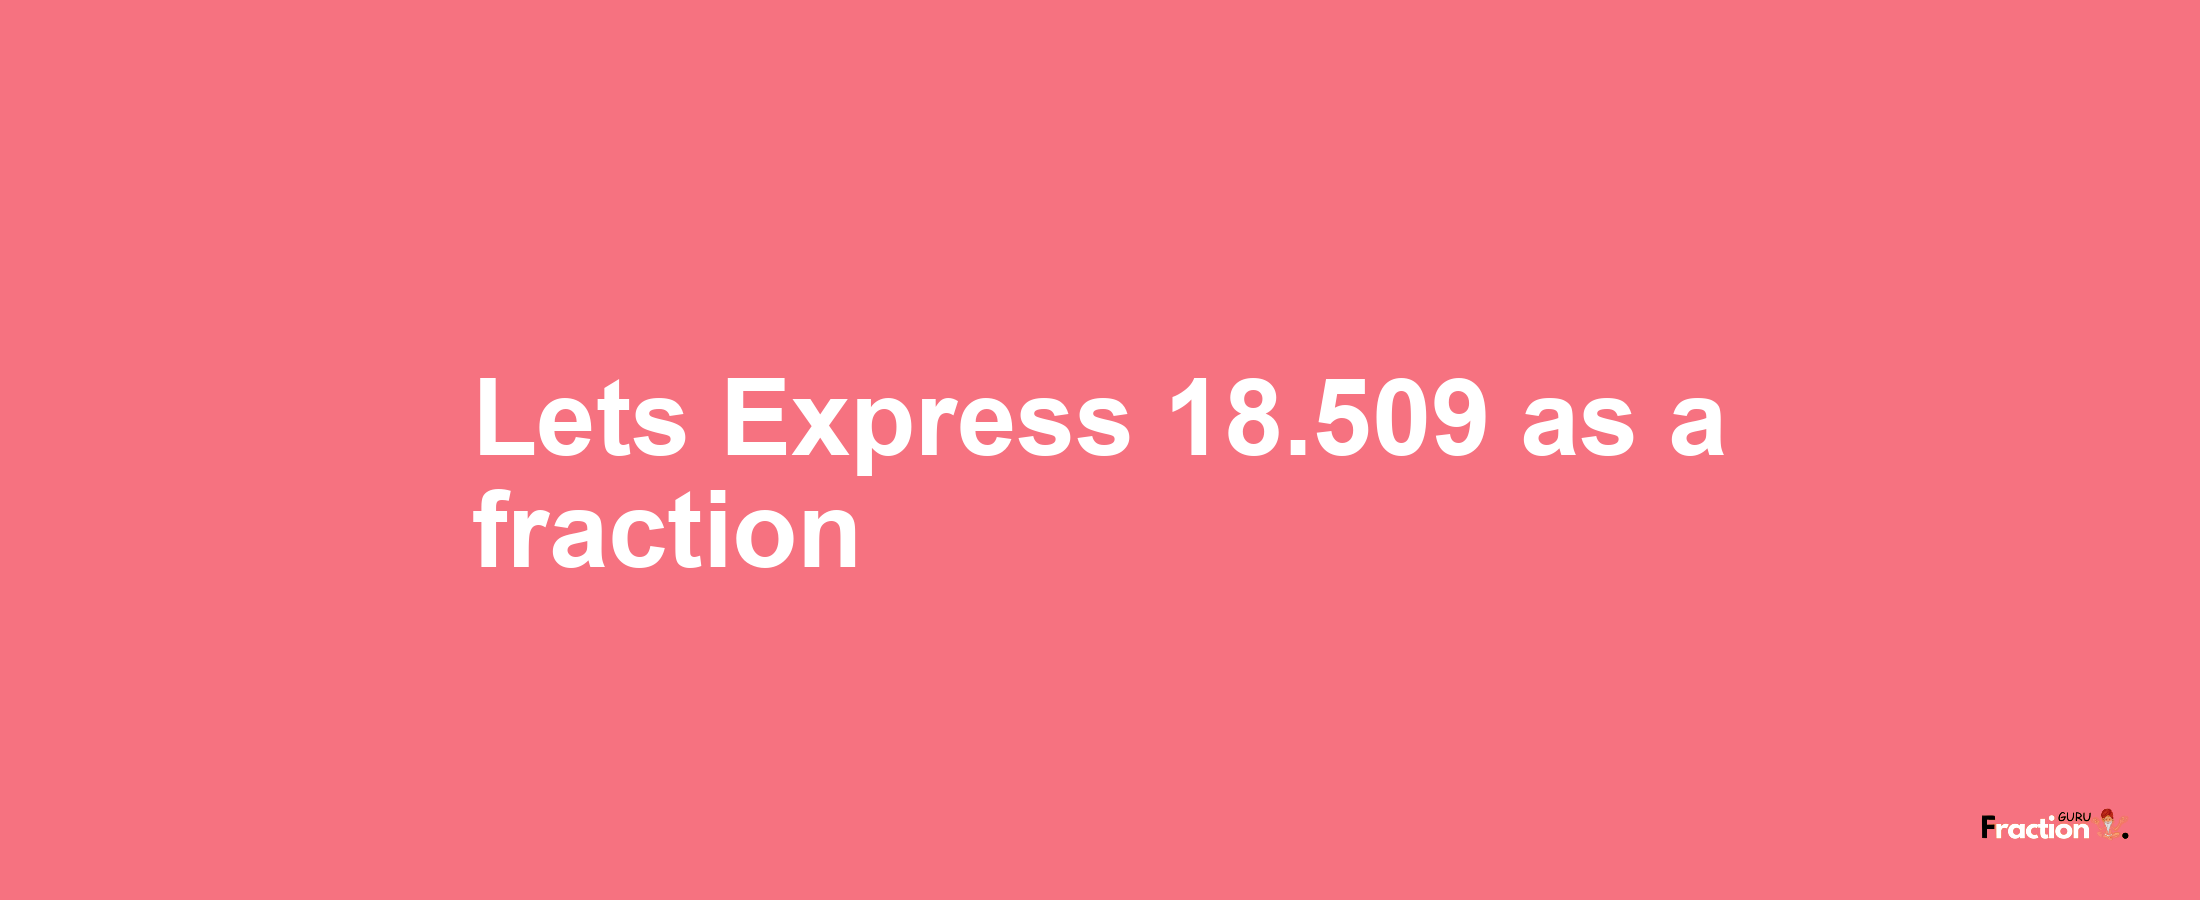 Lets Express 18.509 as afraction